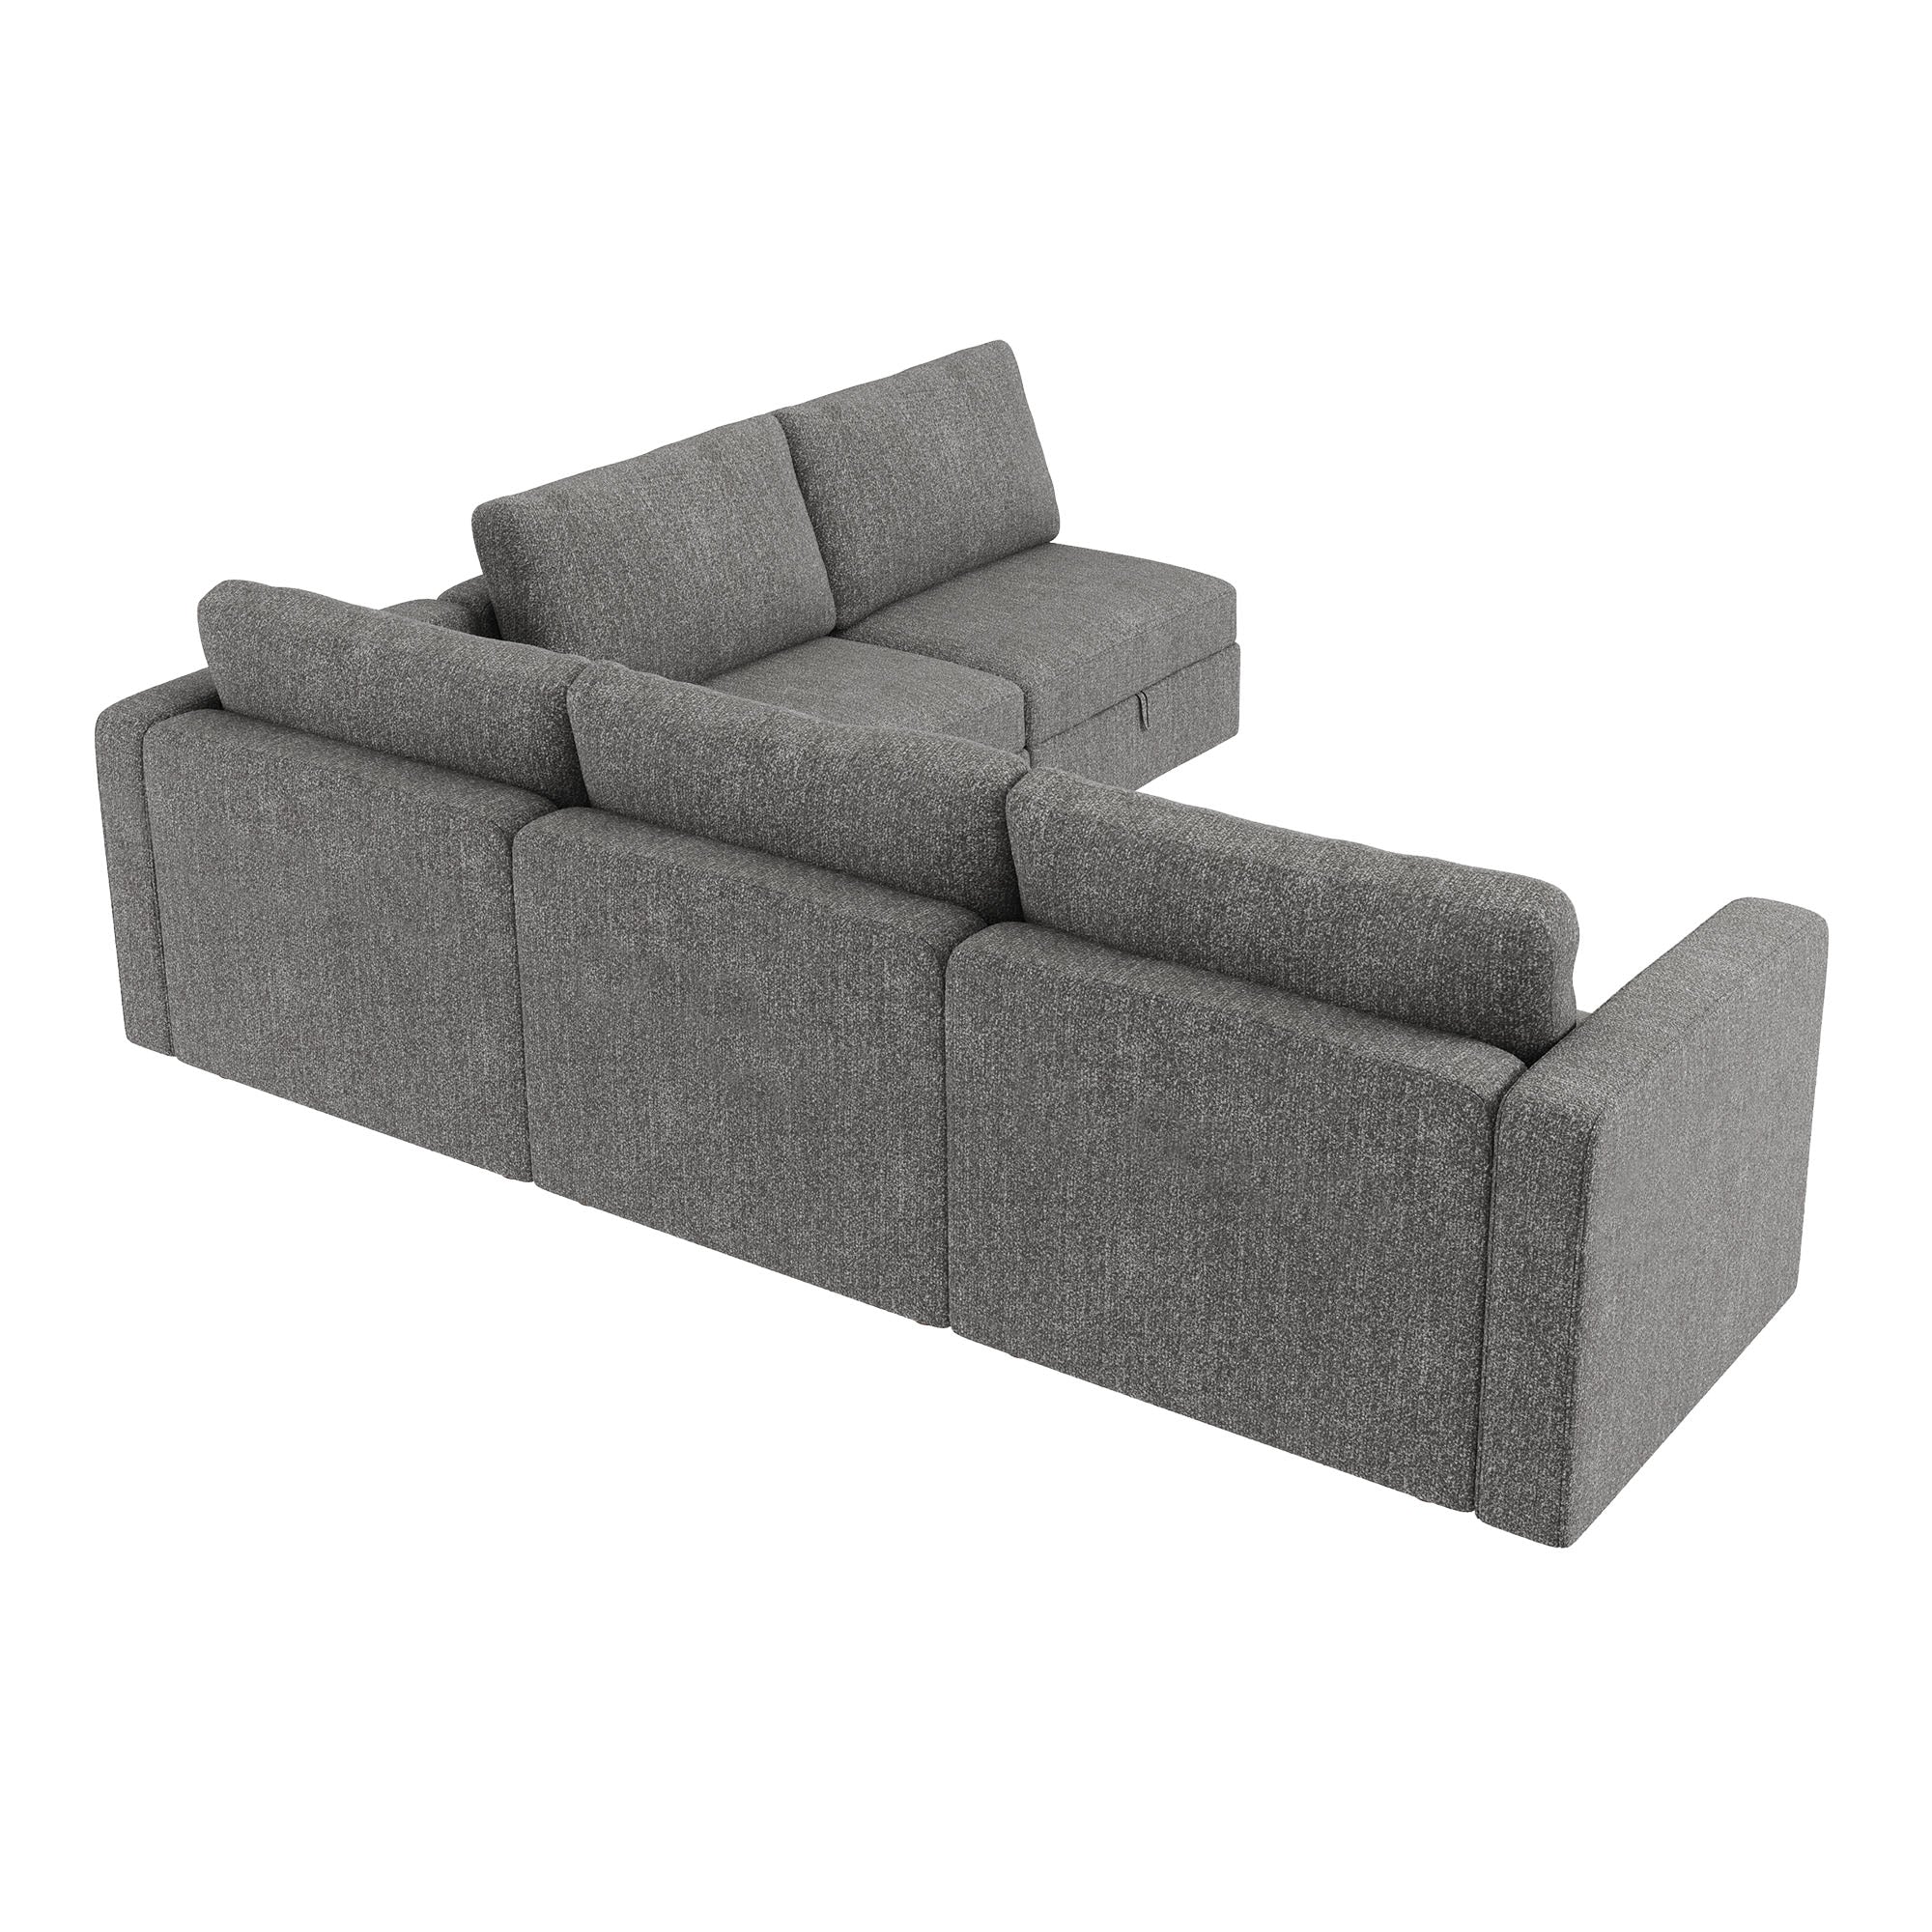 HONBAY Polyester 5 Seaters Modular Sectional Sofa with High Resilience Foam